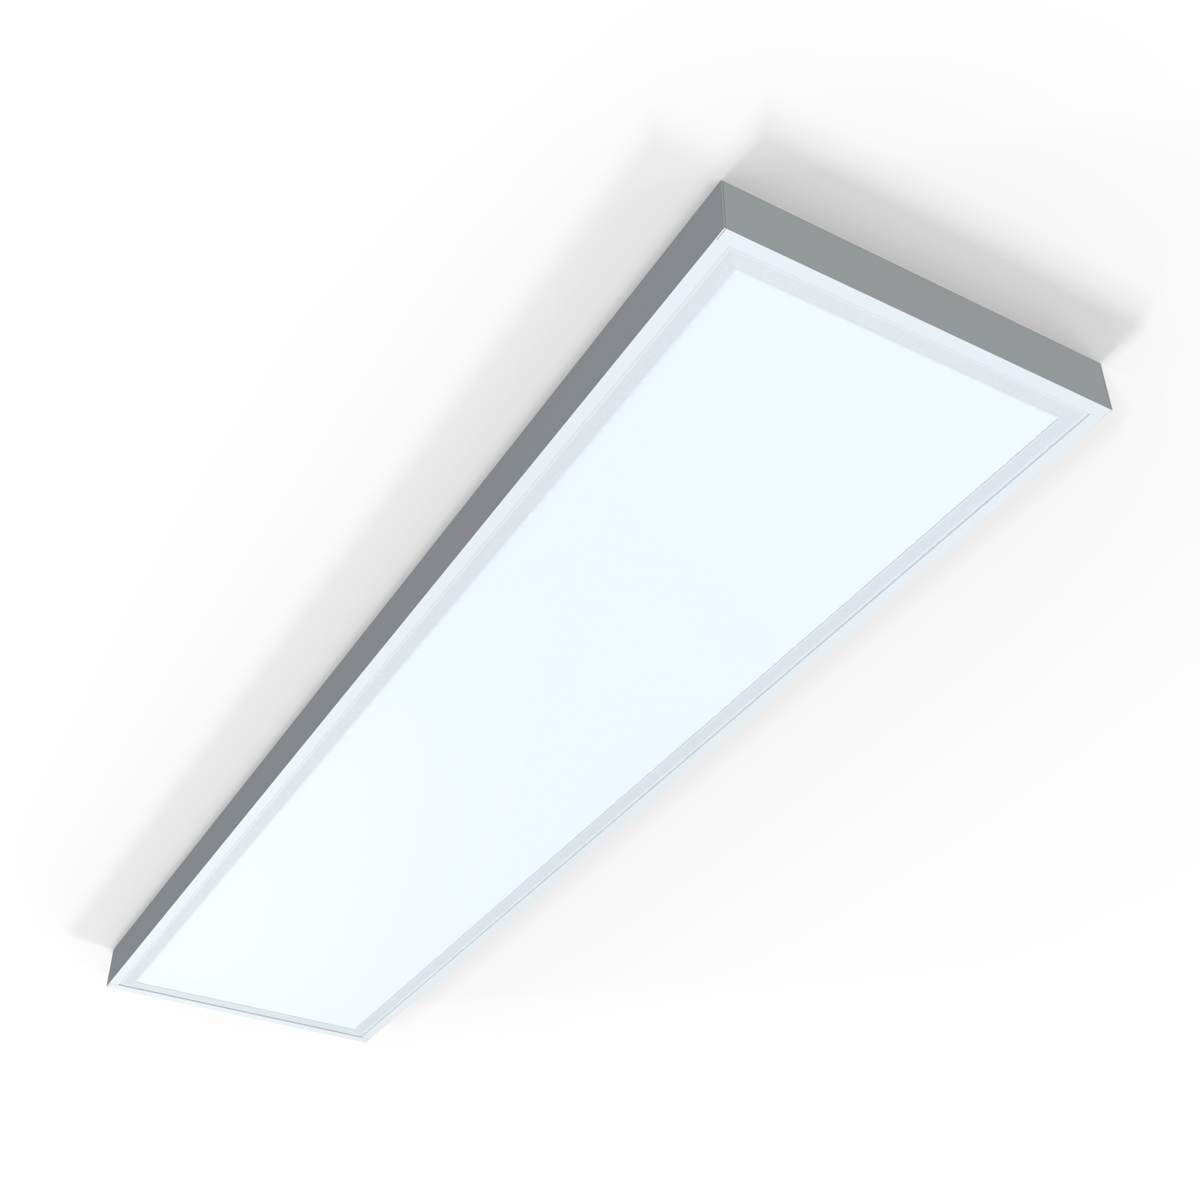 View 1200 x 300mm 40w Surface Mounted LED Panel Light information